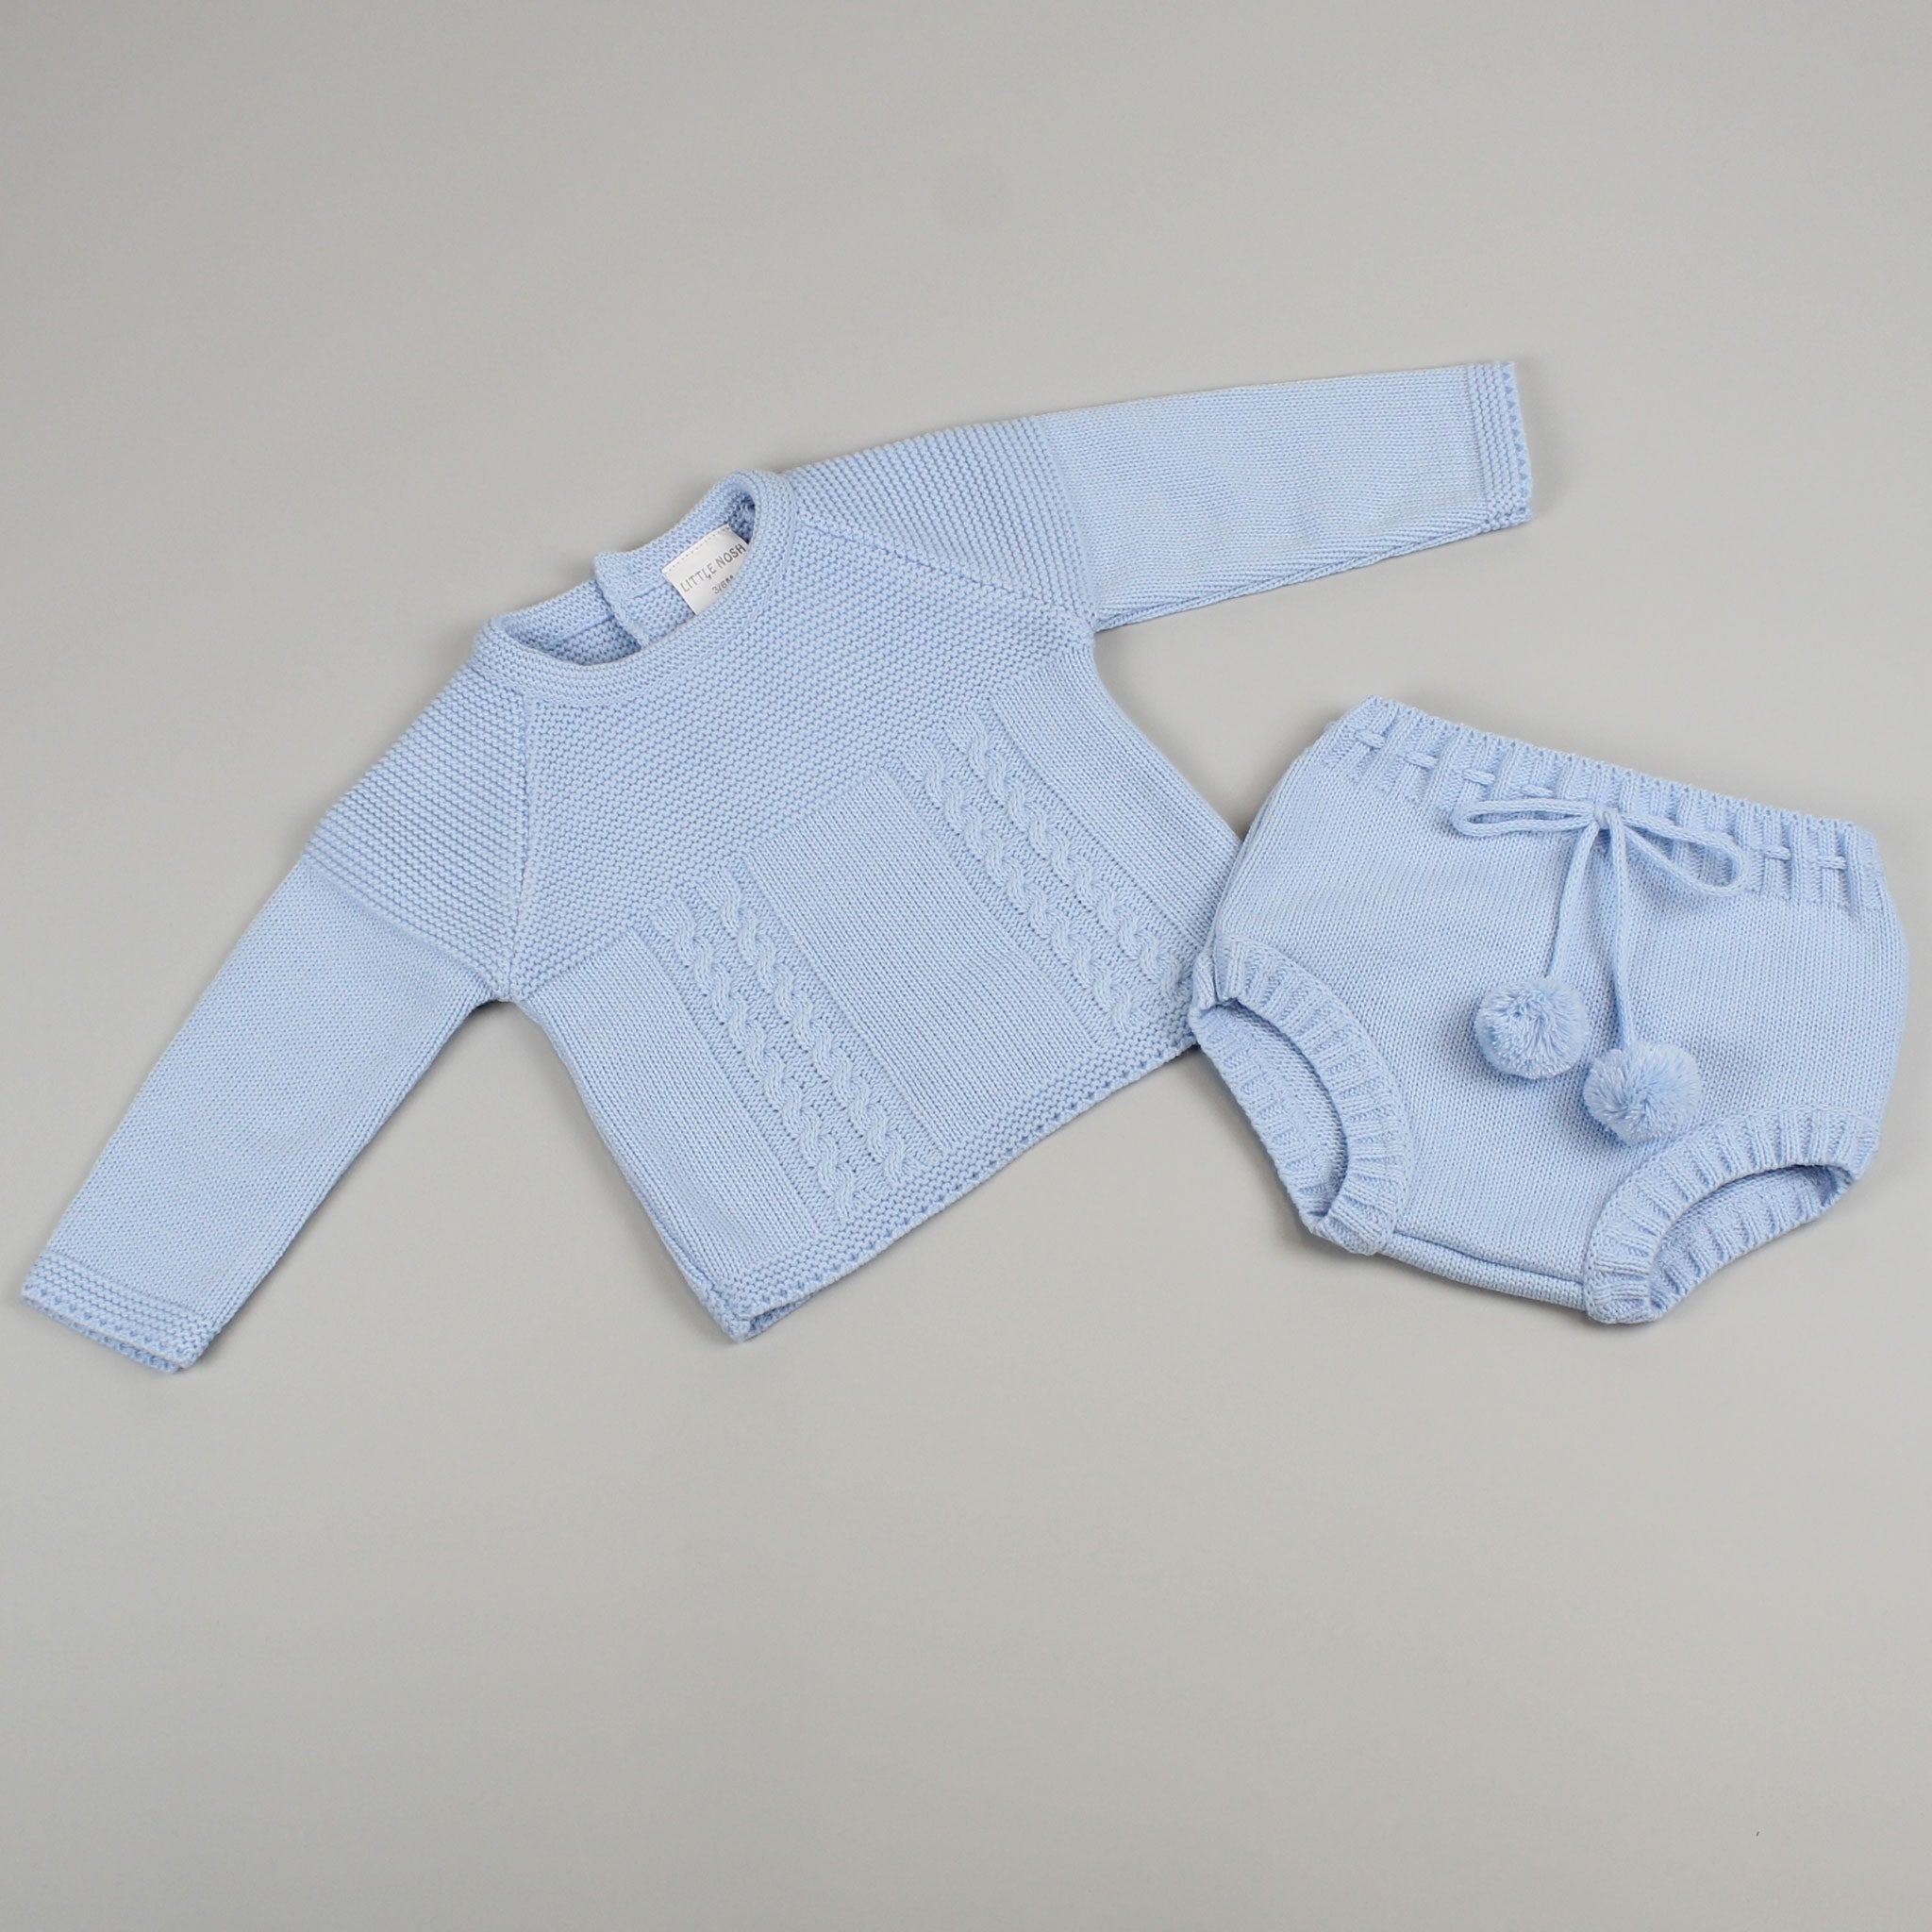 baby boys blue knitted outfit with jam pants